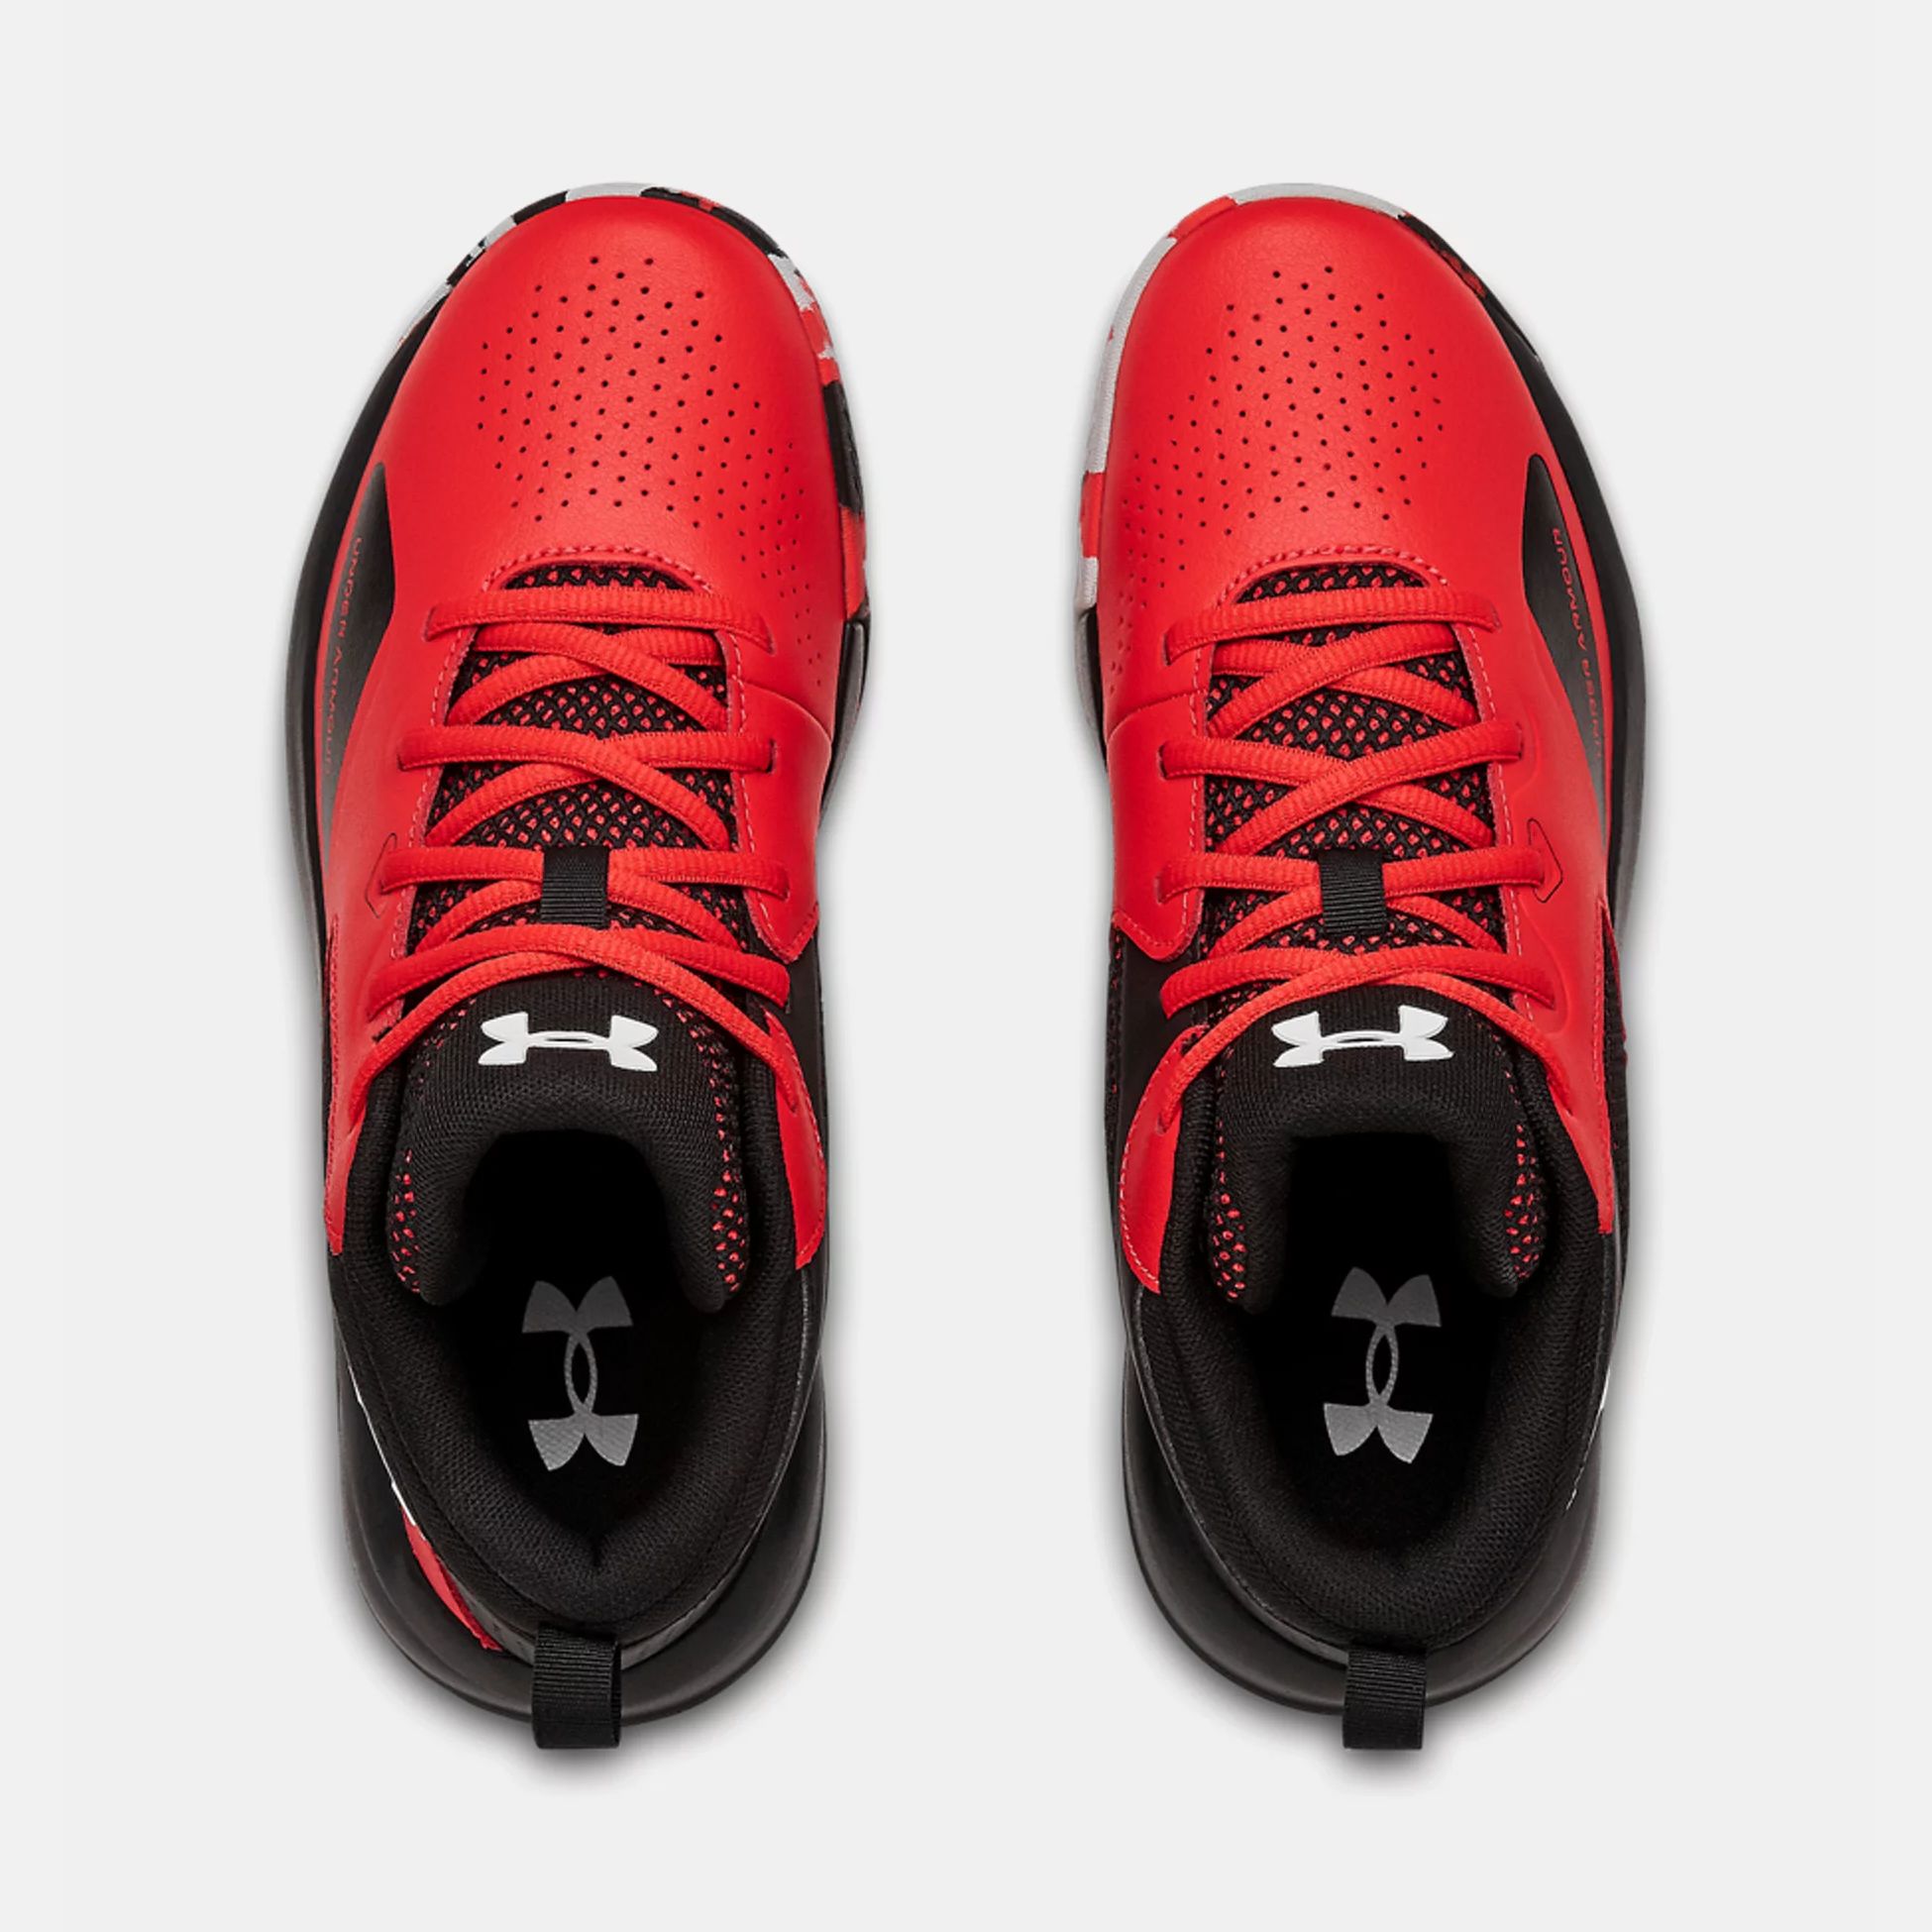 Basketball Shoes -  under armour UA Lockdown 5 3533